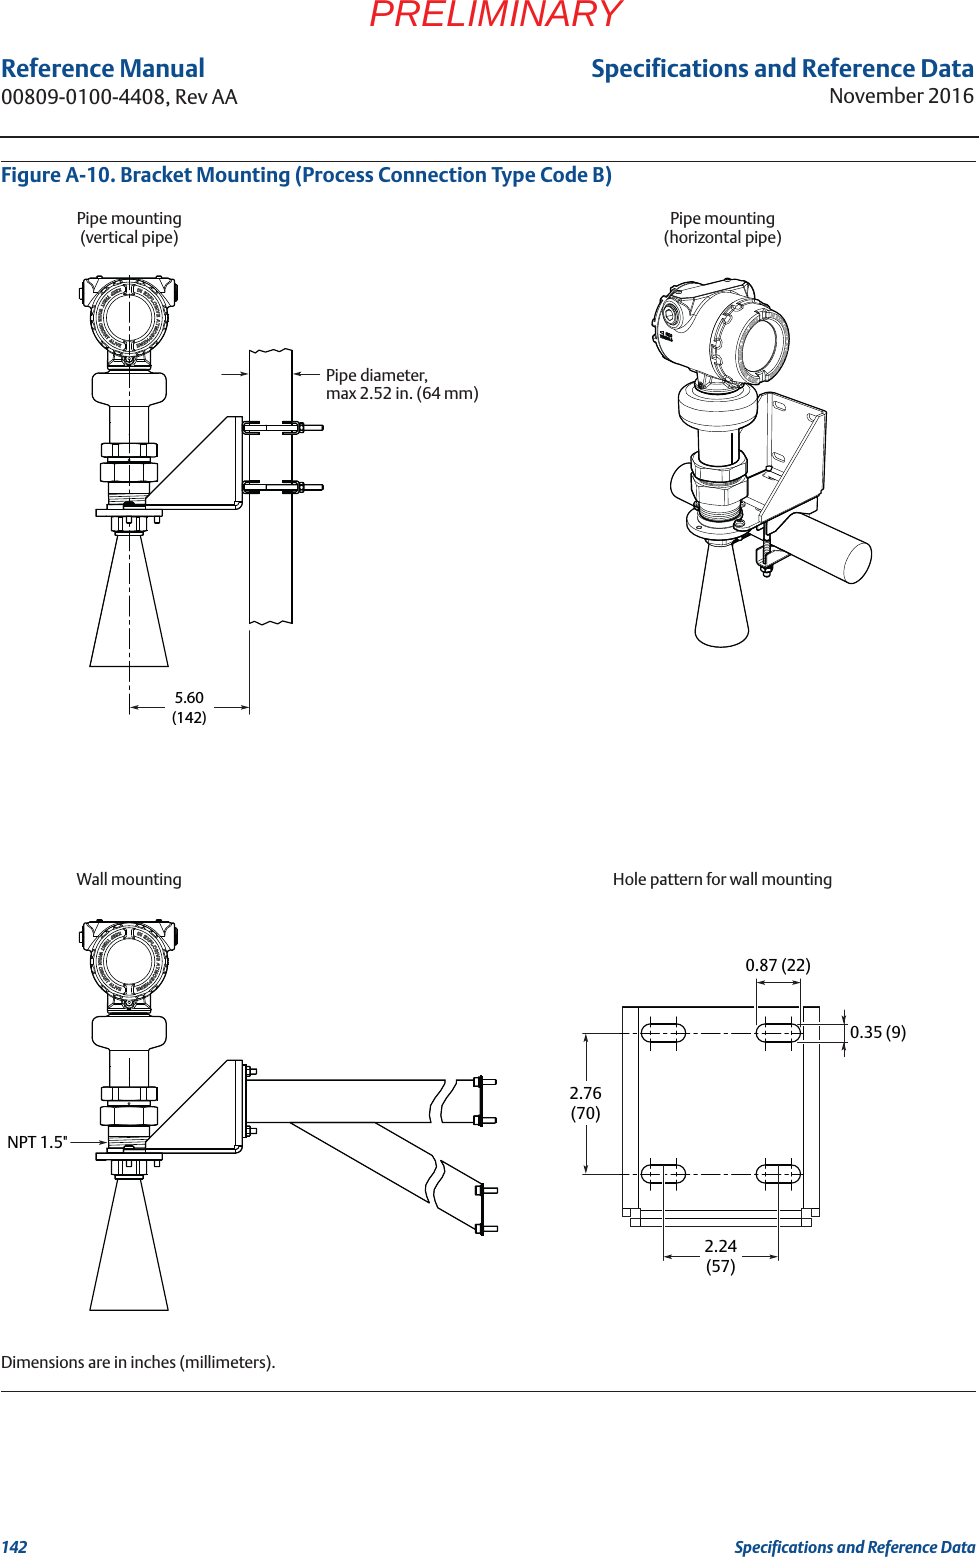 Specifications and Reference DataNovember 2016Reference Manual 00809-0100-4408, Rev AA142 Specifications and Reference DataPRELIMINARYFigure A-10. Bracket Mounting (Process Connection Type Code B)Dimensions are in inches (millimeters).NPT 1.5&quot;5.60(142)2.24(57)0.35 (9)0.87 (22)2.76(70)Pipe mounting(vertical pipe)Pipe mounting(horizontal pipe)Wall mountingPipe diameter,max 2.52 in. (64 mm)Hole pattern for wall mounting